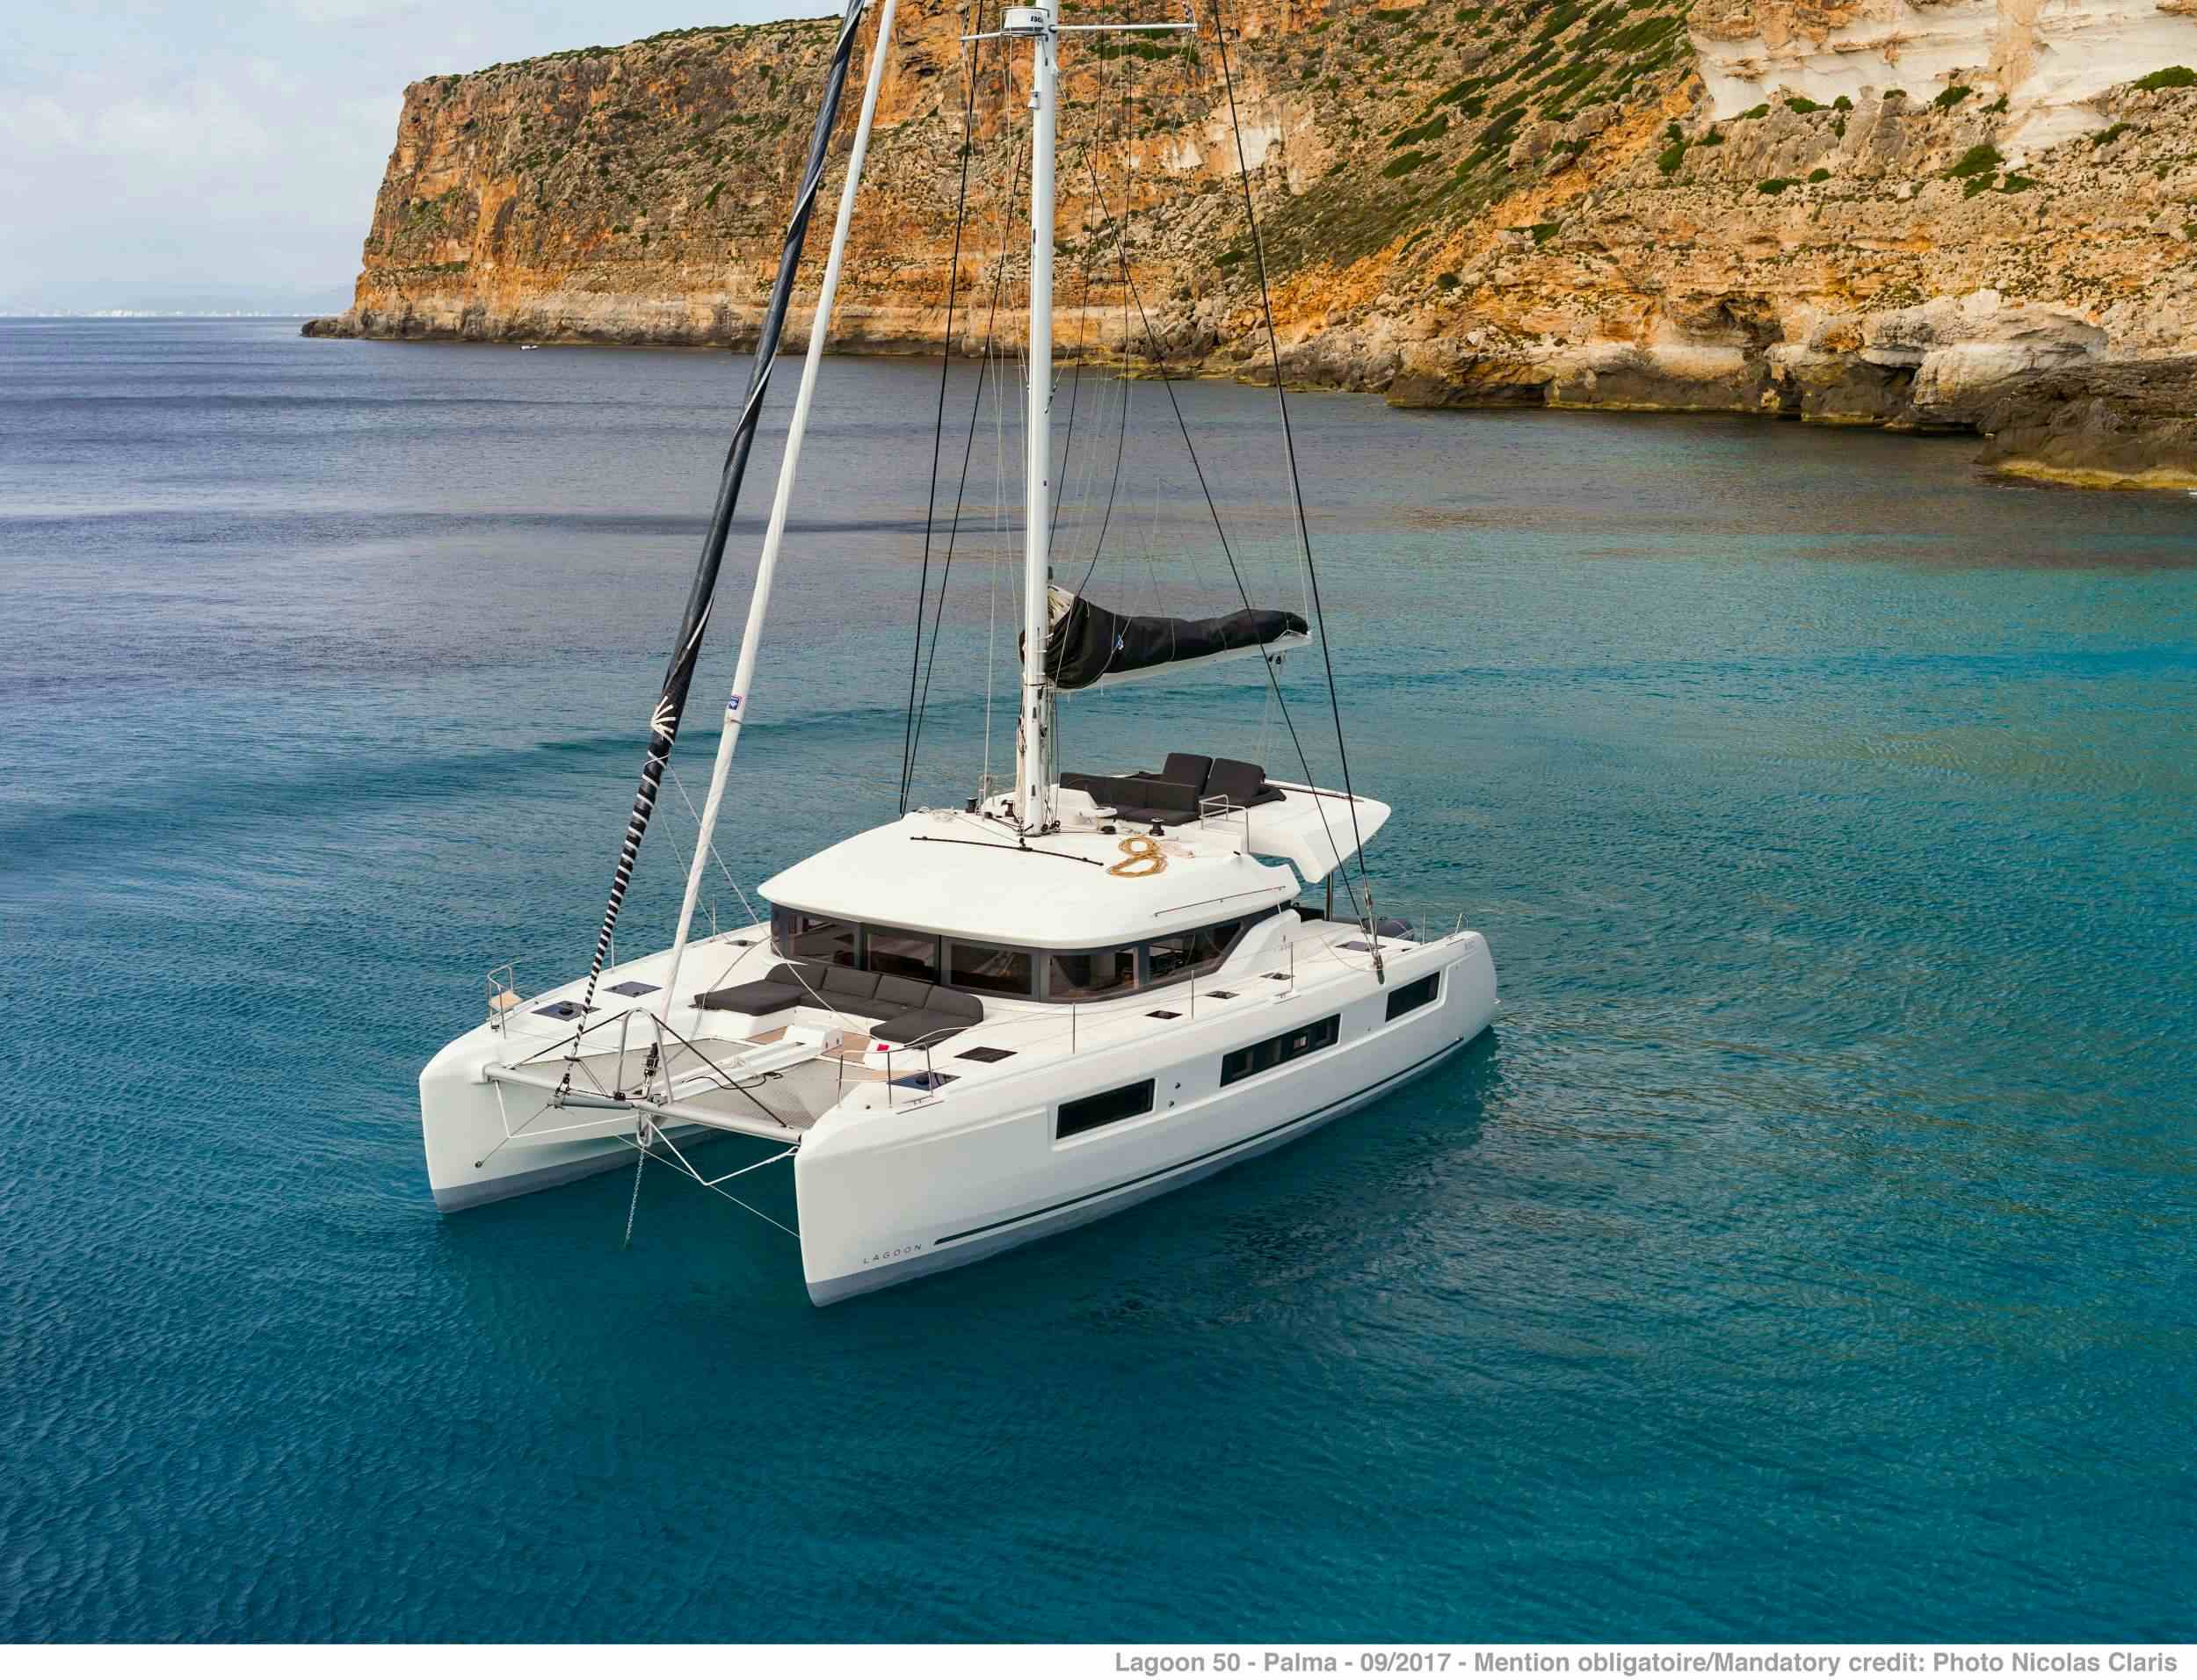 ONEIDA 2 - Yacht Charter Volos & Boat hire in Greece 1